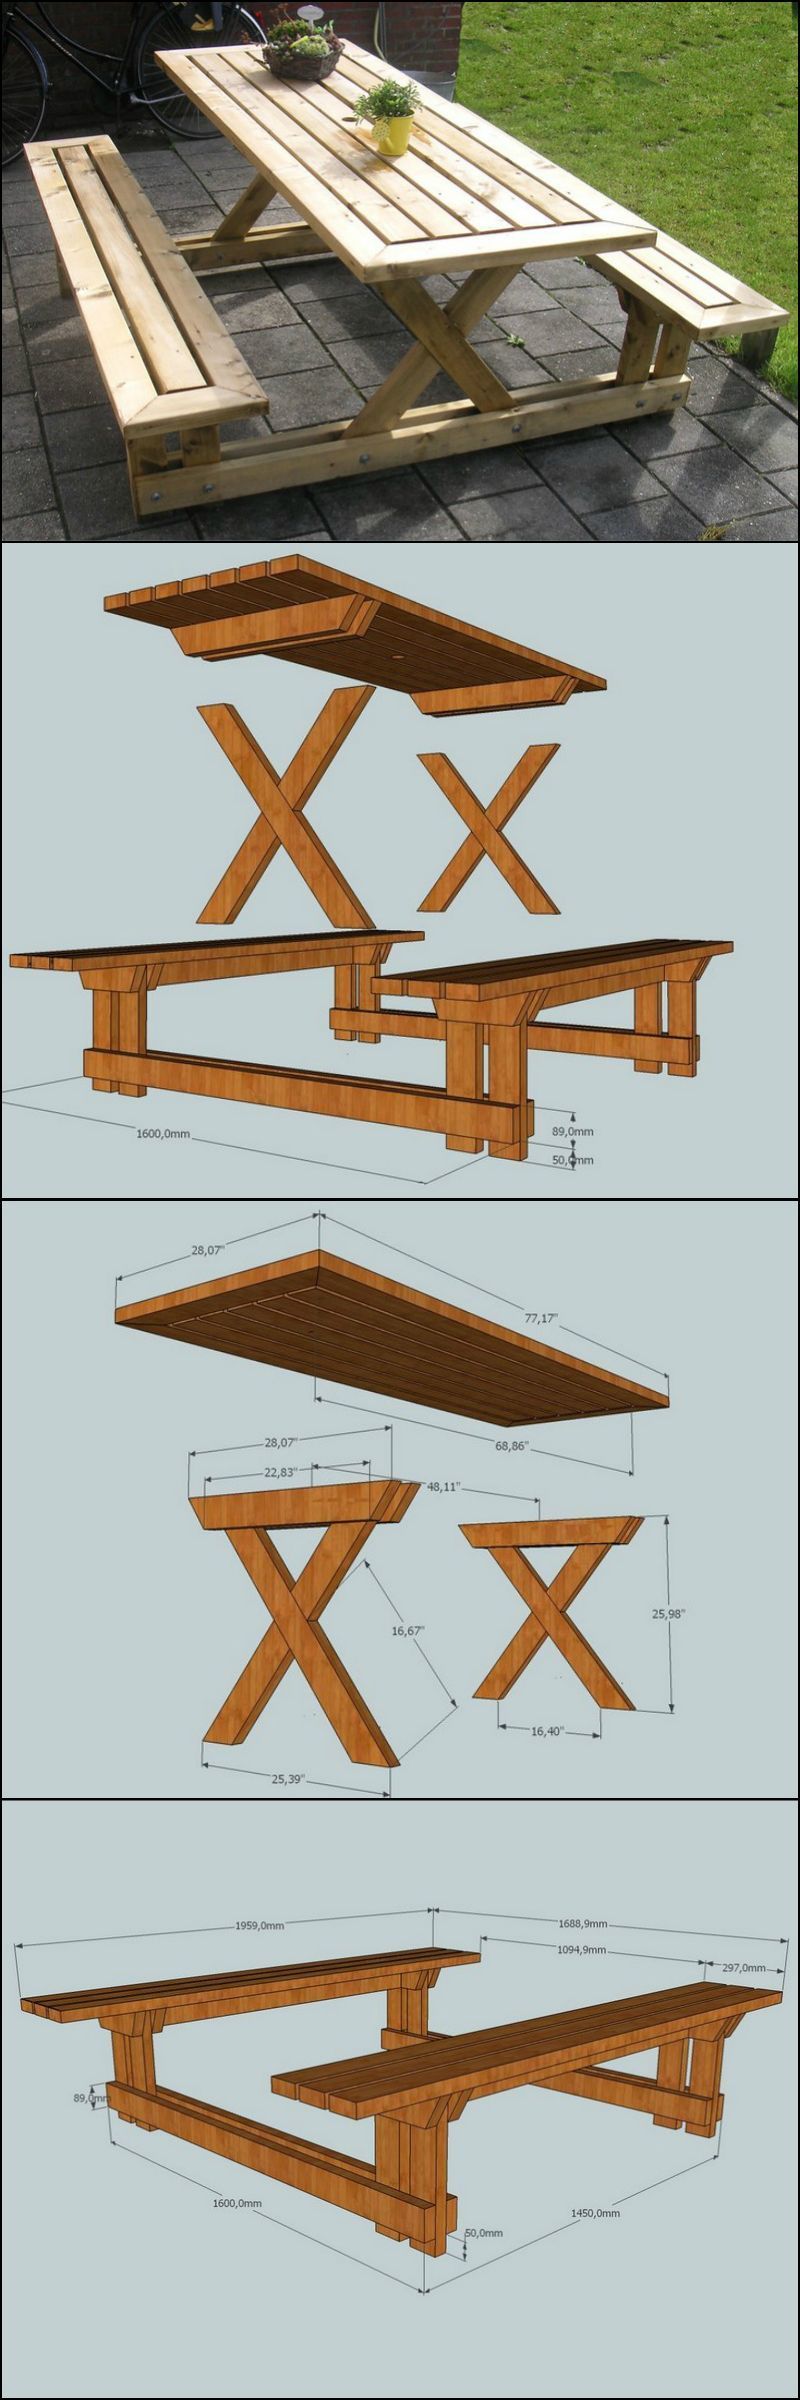 Learn How To Build Your Own Backyard Picnic Table theownerbuilderne… Like us, you’ve probably seen